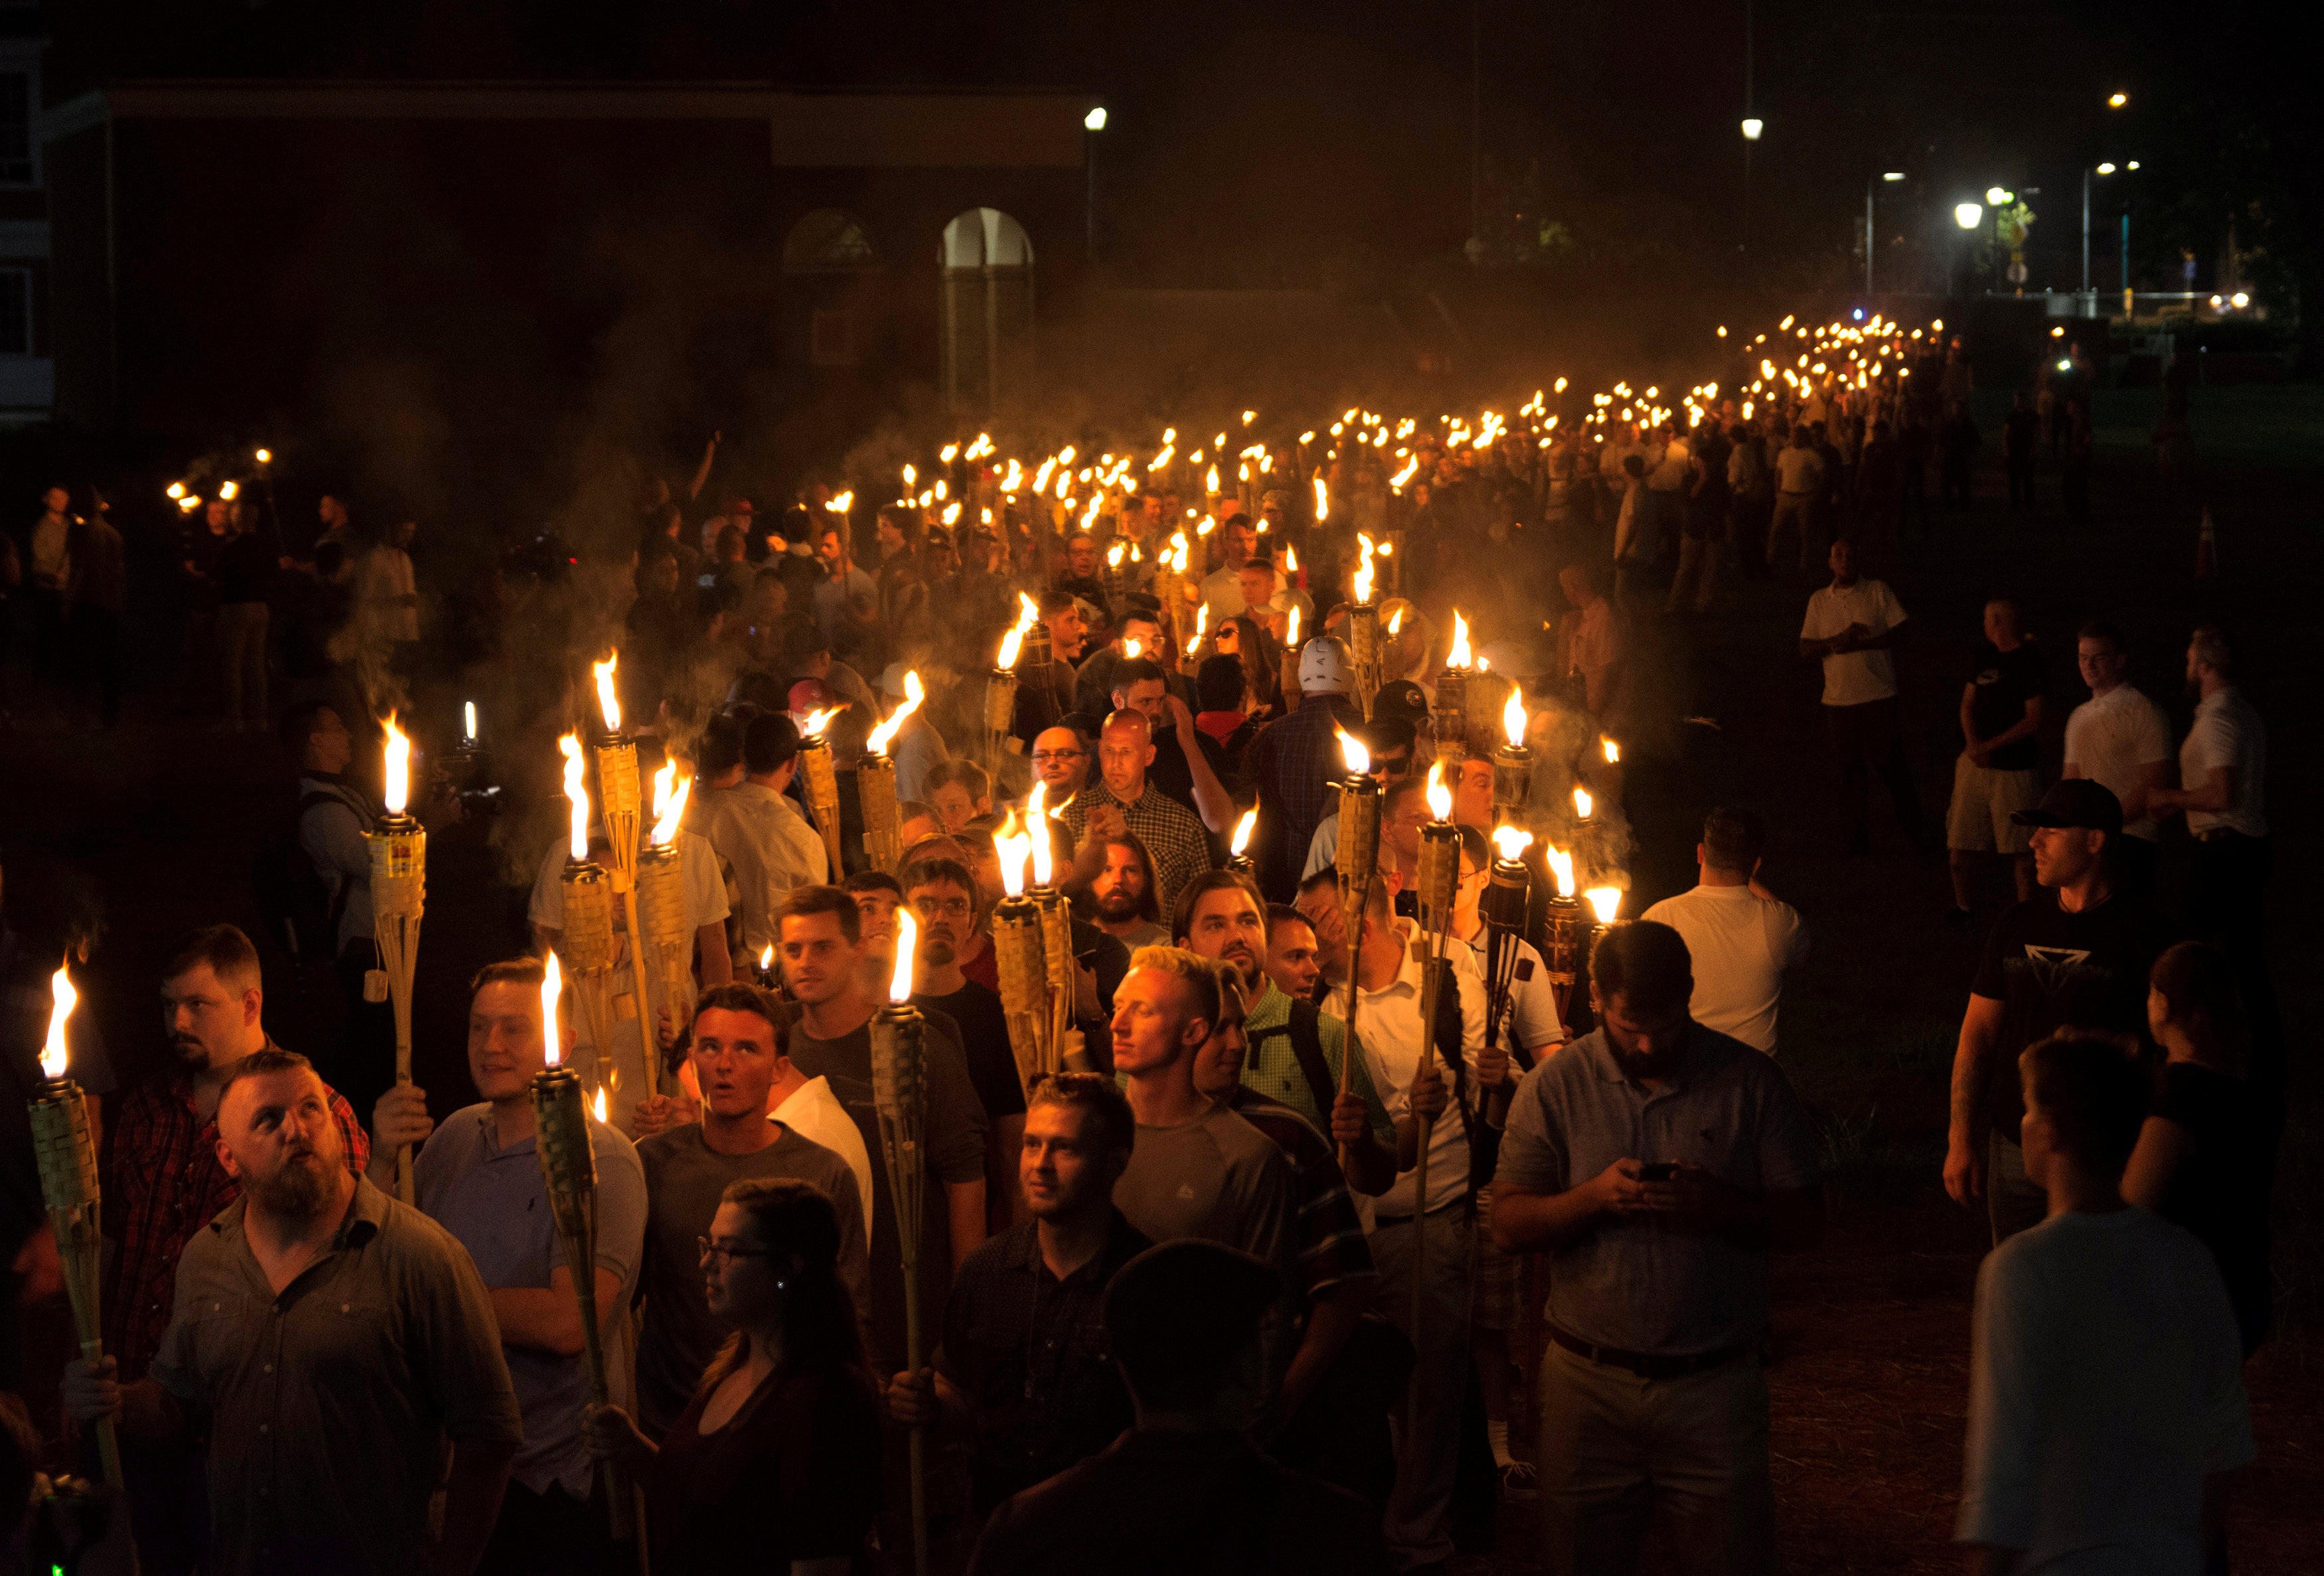 Torch-wielding white nationalists march through University of ...